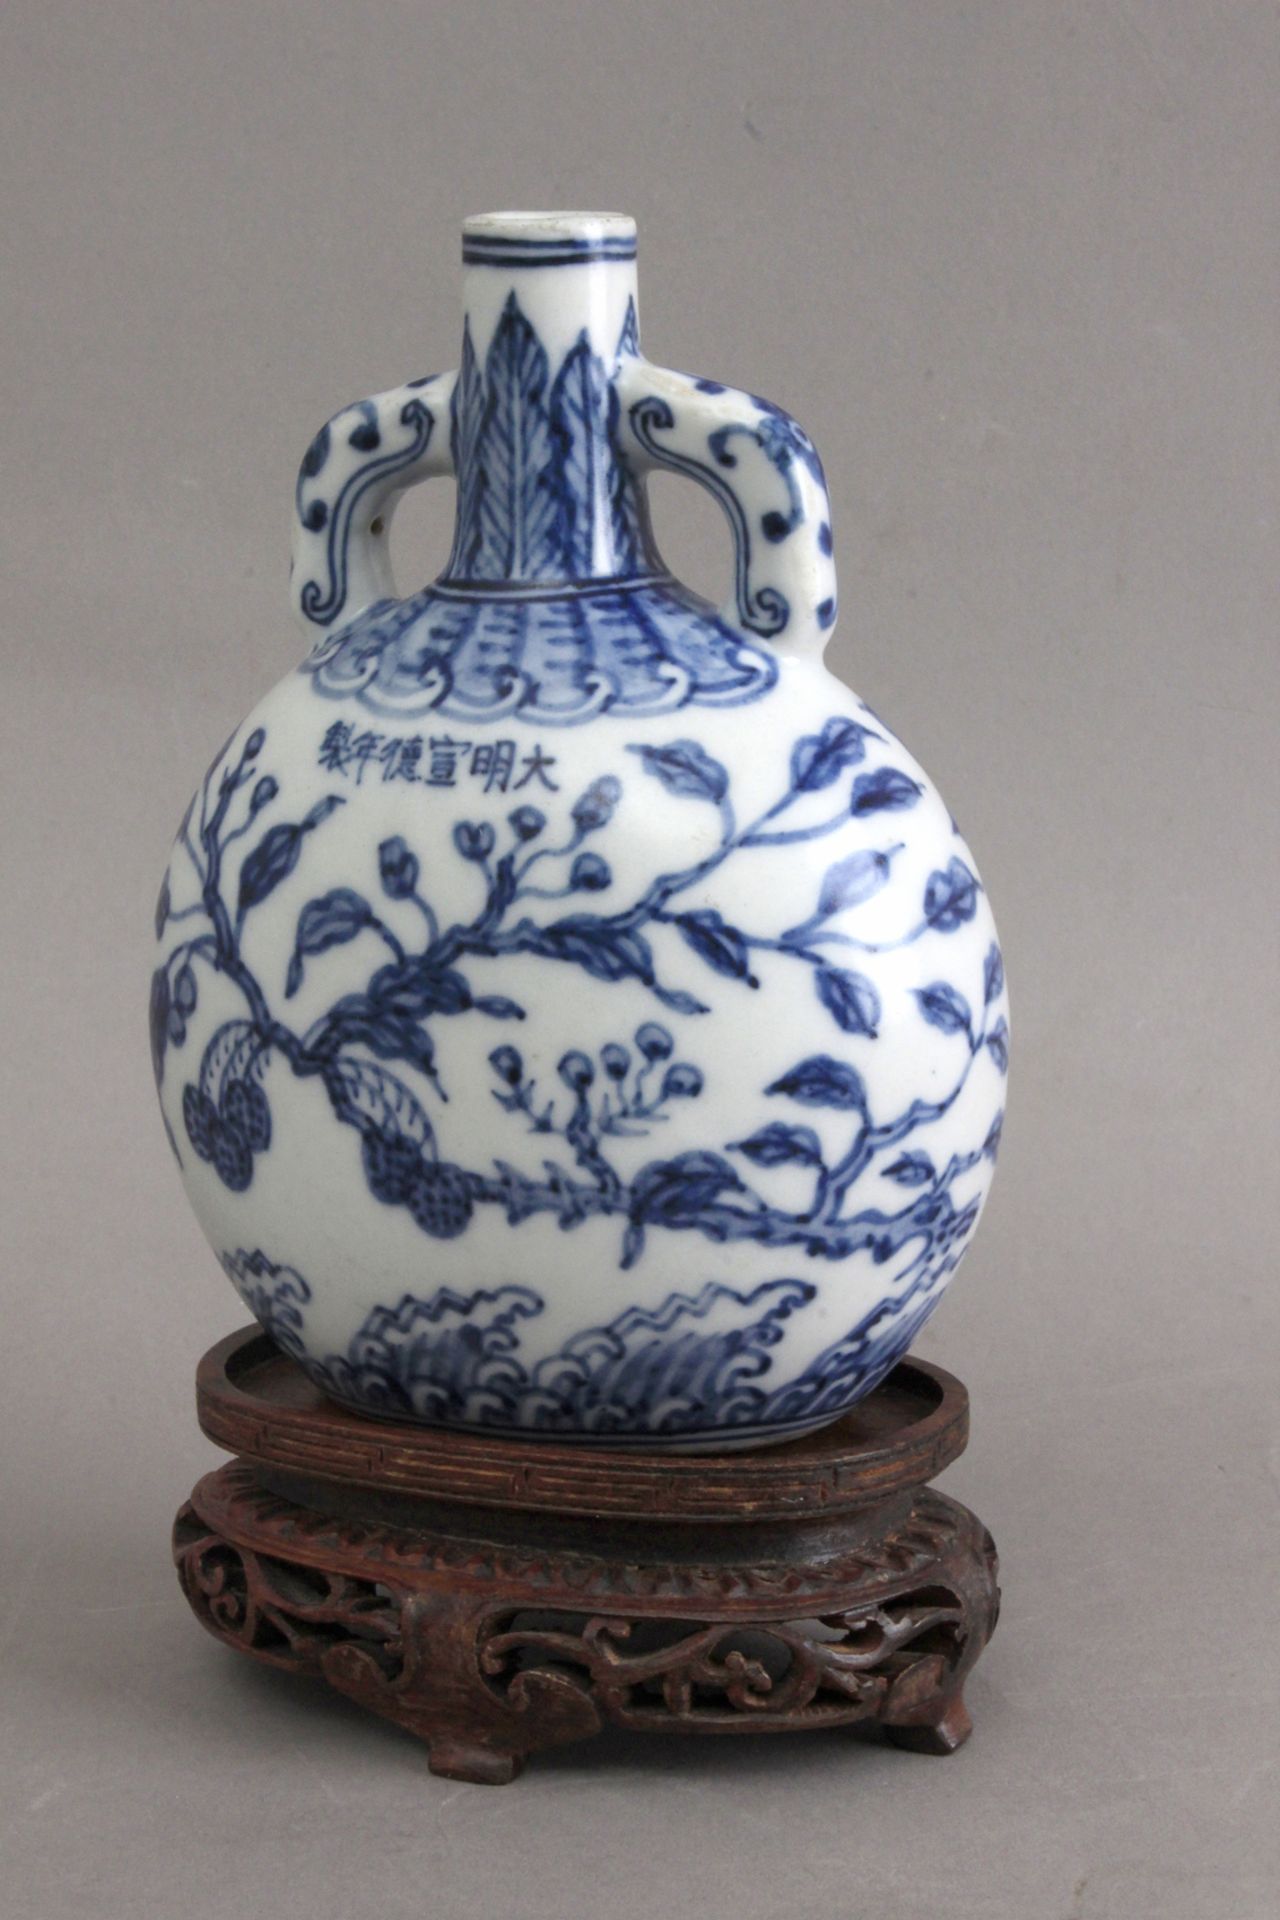 19th century Chinese pilgrim bottle in blue and white porcelain